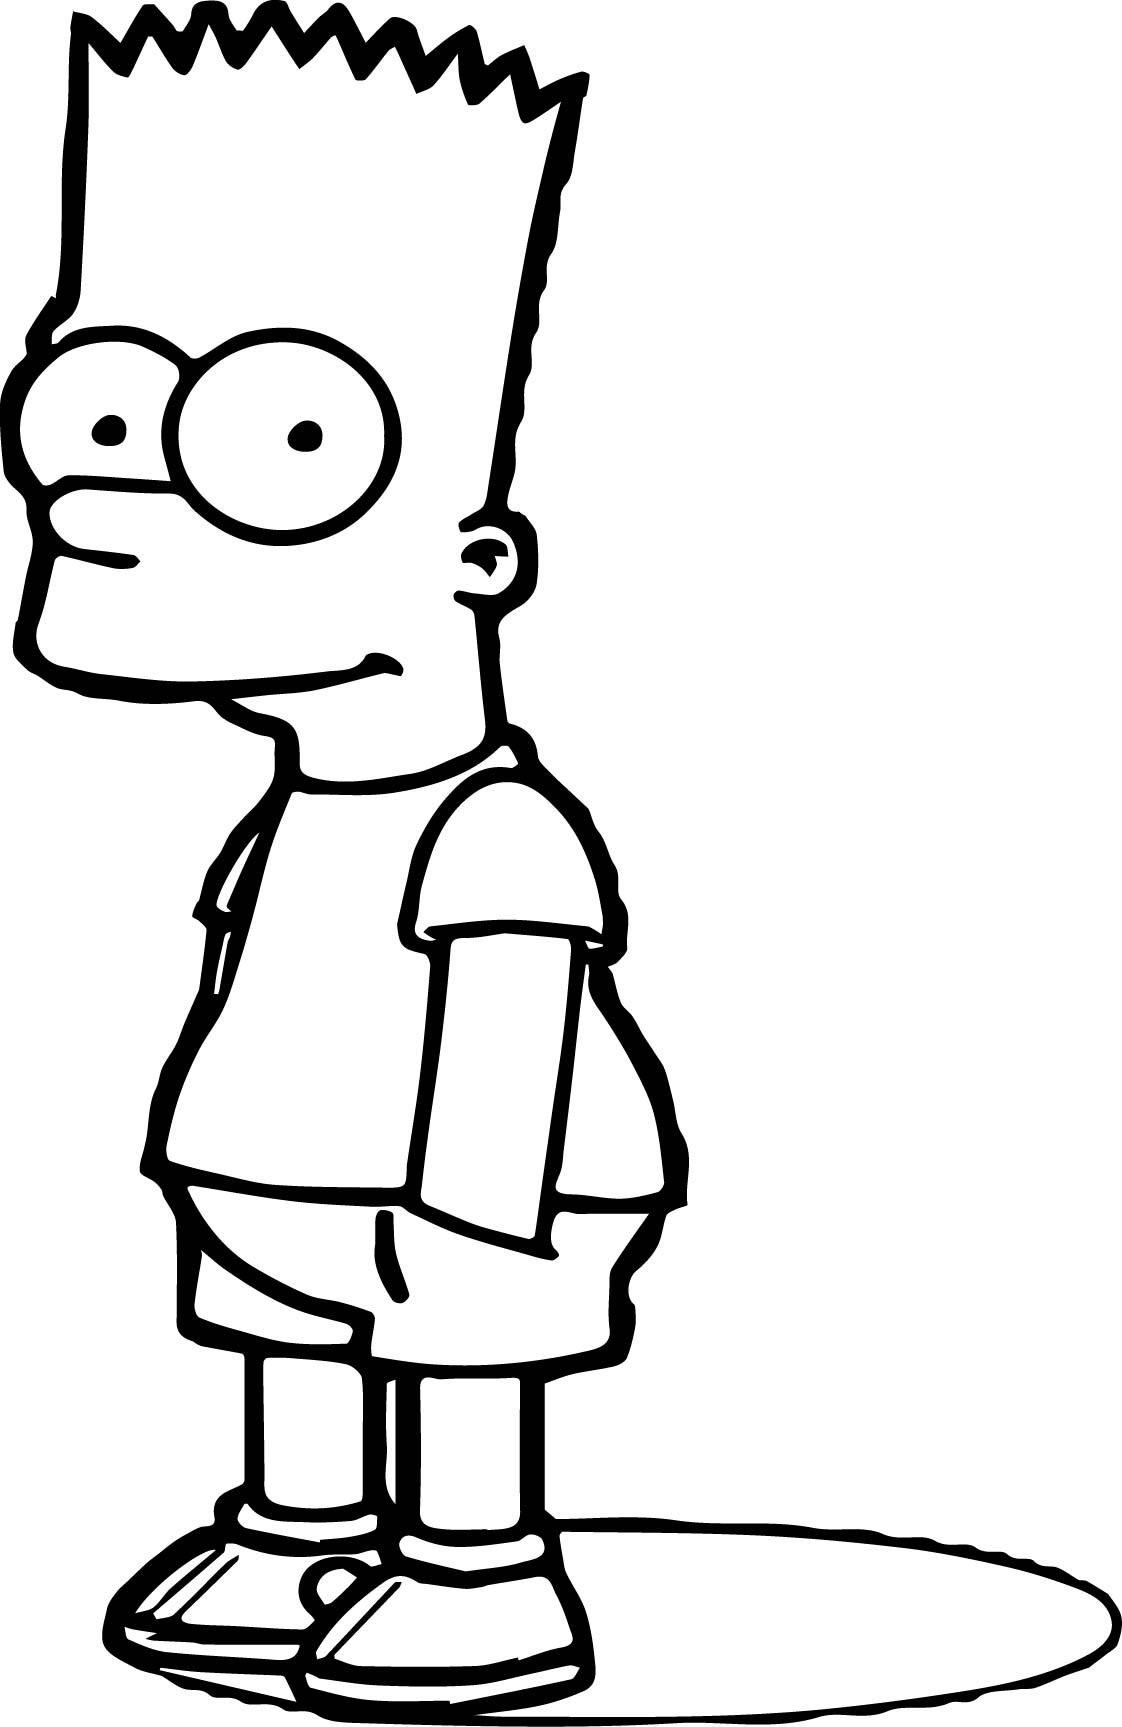 Bart Simpson Coloring Pages
 Bart Simpson Pose Coloring Page